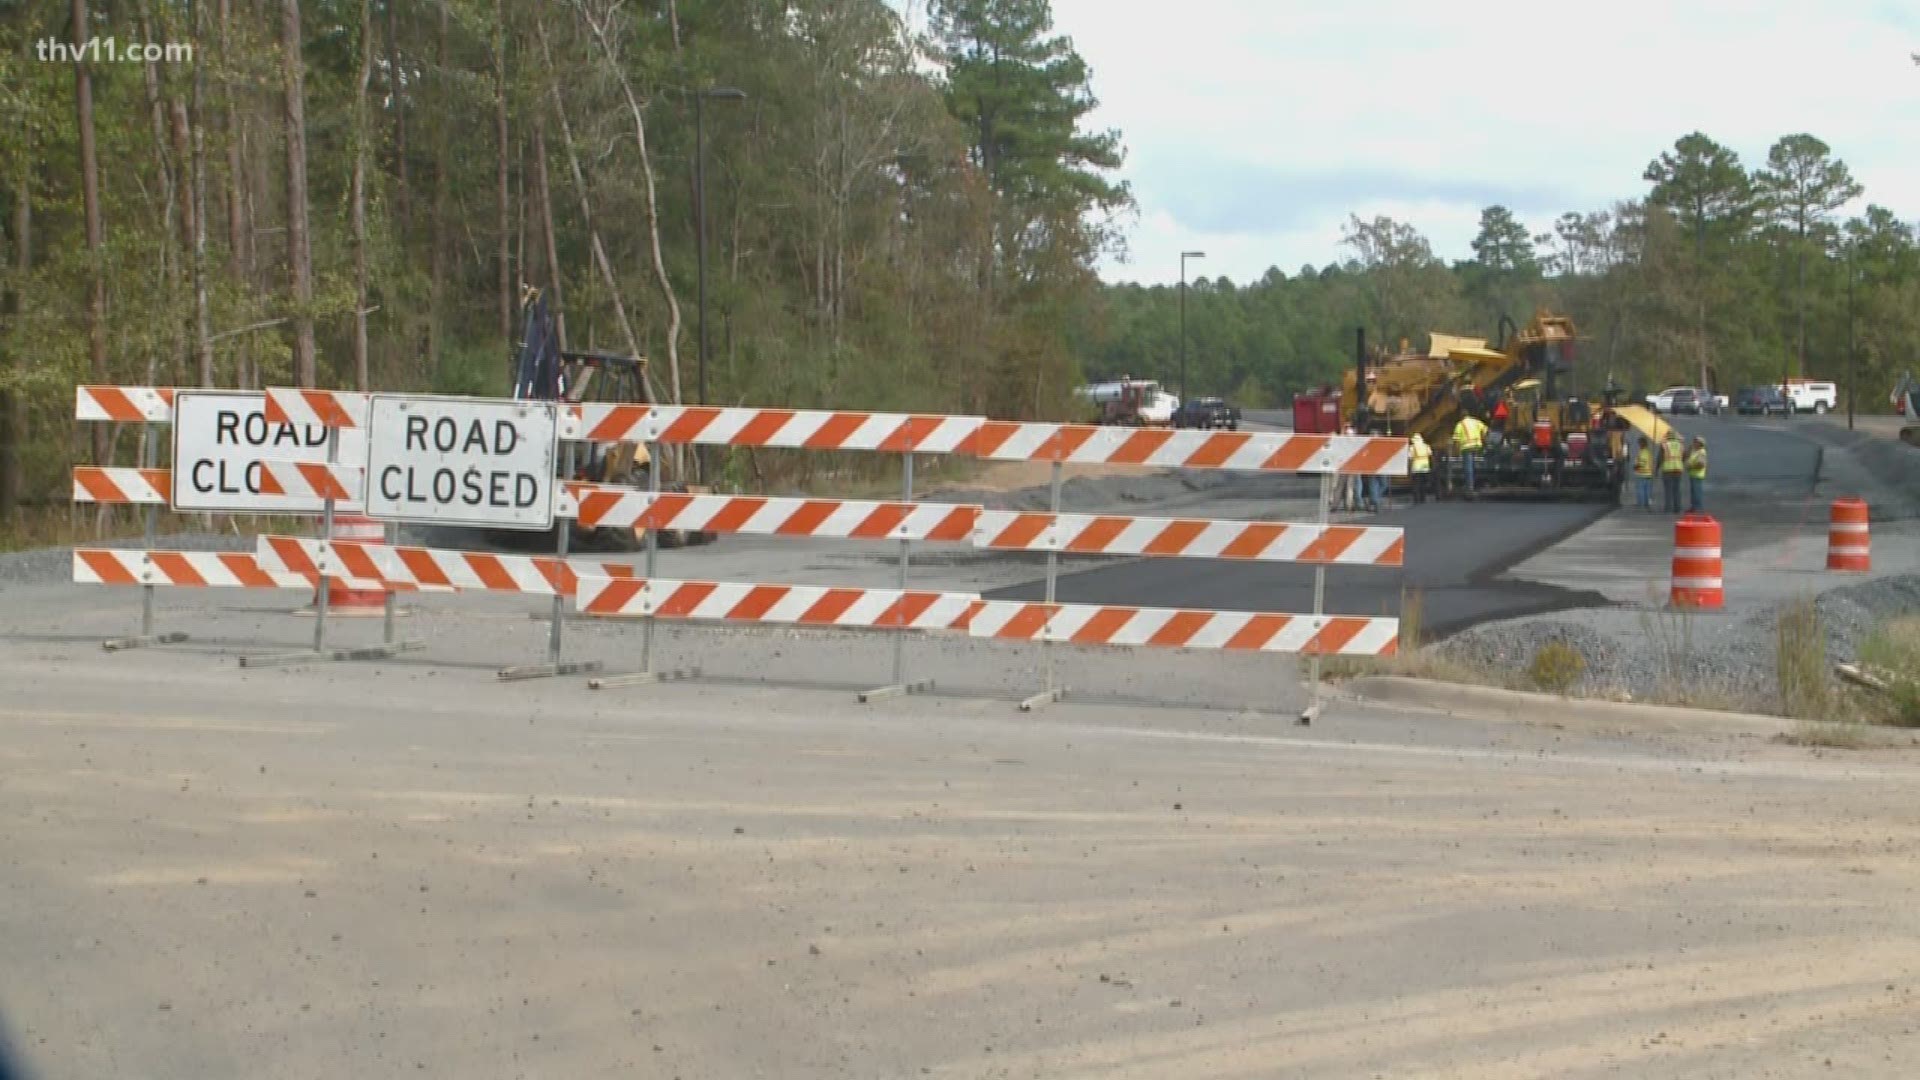 Construction is wrapping up on an interstate exit in Maumelle. Plans to close a nearby road is pitting neighbor versus neighbor... and county policy.